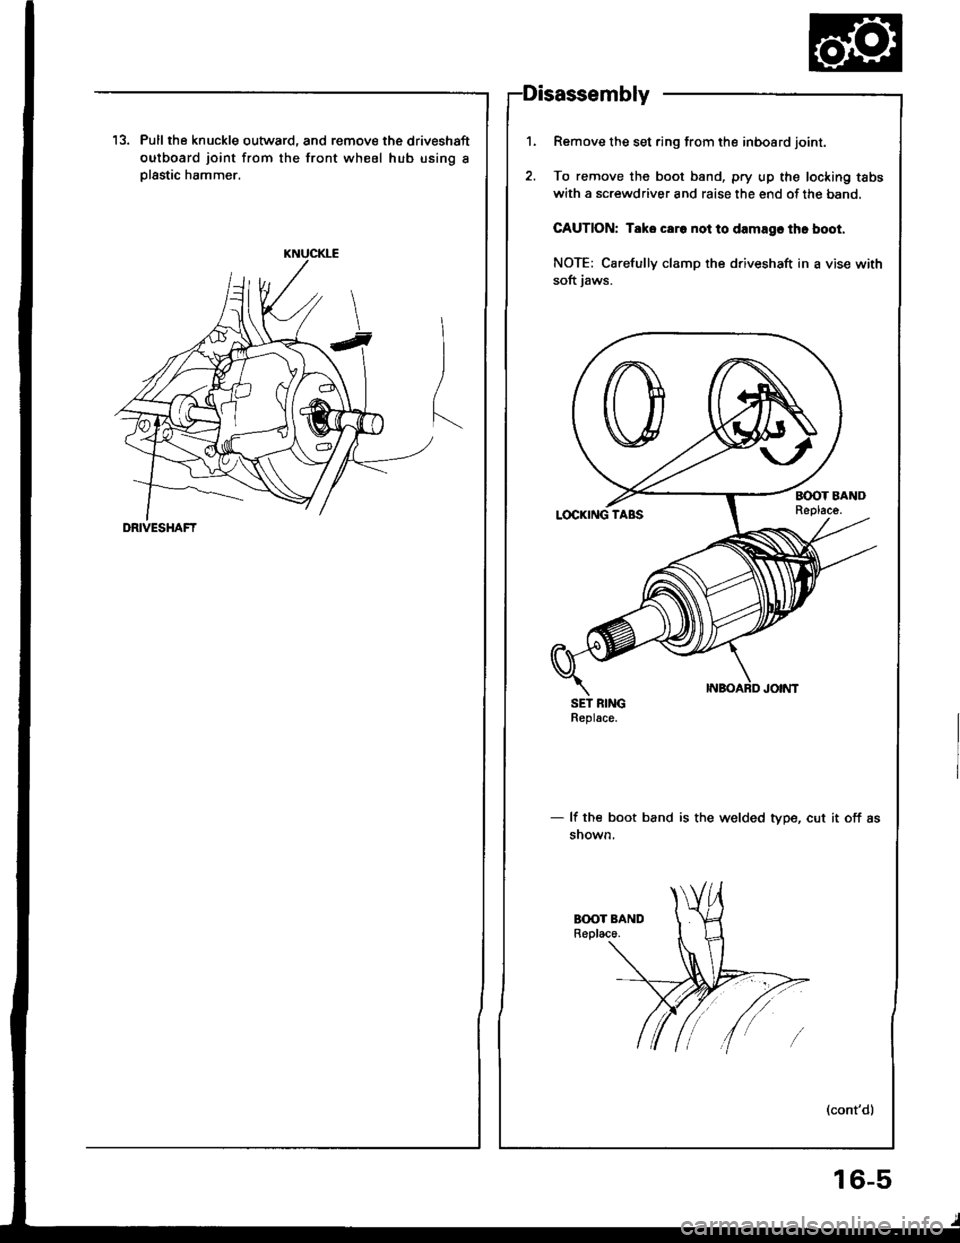 HONDA INTEGRA 1994 4.G Workshop Manual KNUCKLE
DRIVESHAFT
13. Pull the knuckle outward, and remove the driveshaft
outboard joint from the front wheel hub using I
Dlastic hammer.
Remove the set ring from the inboard joint.
To remove the boo